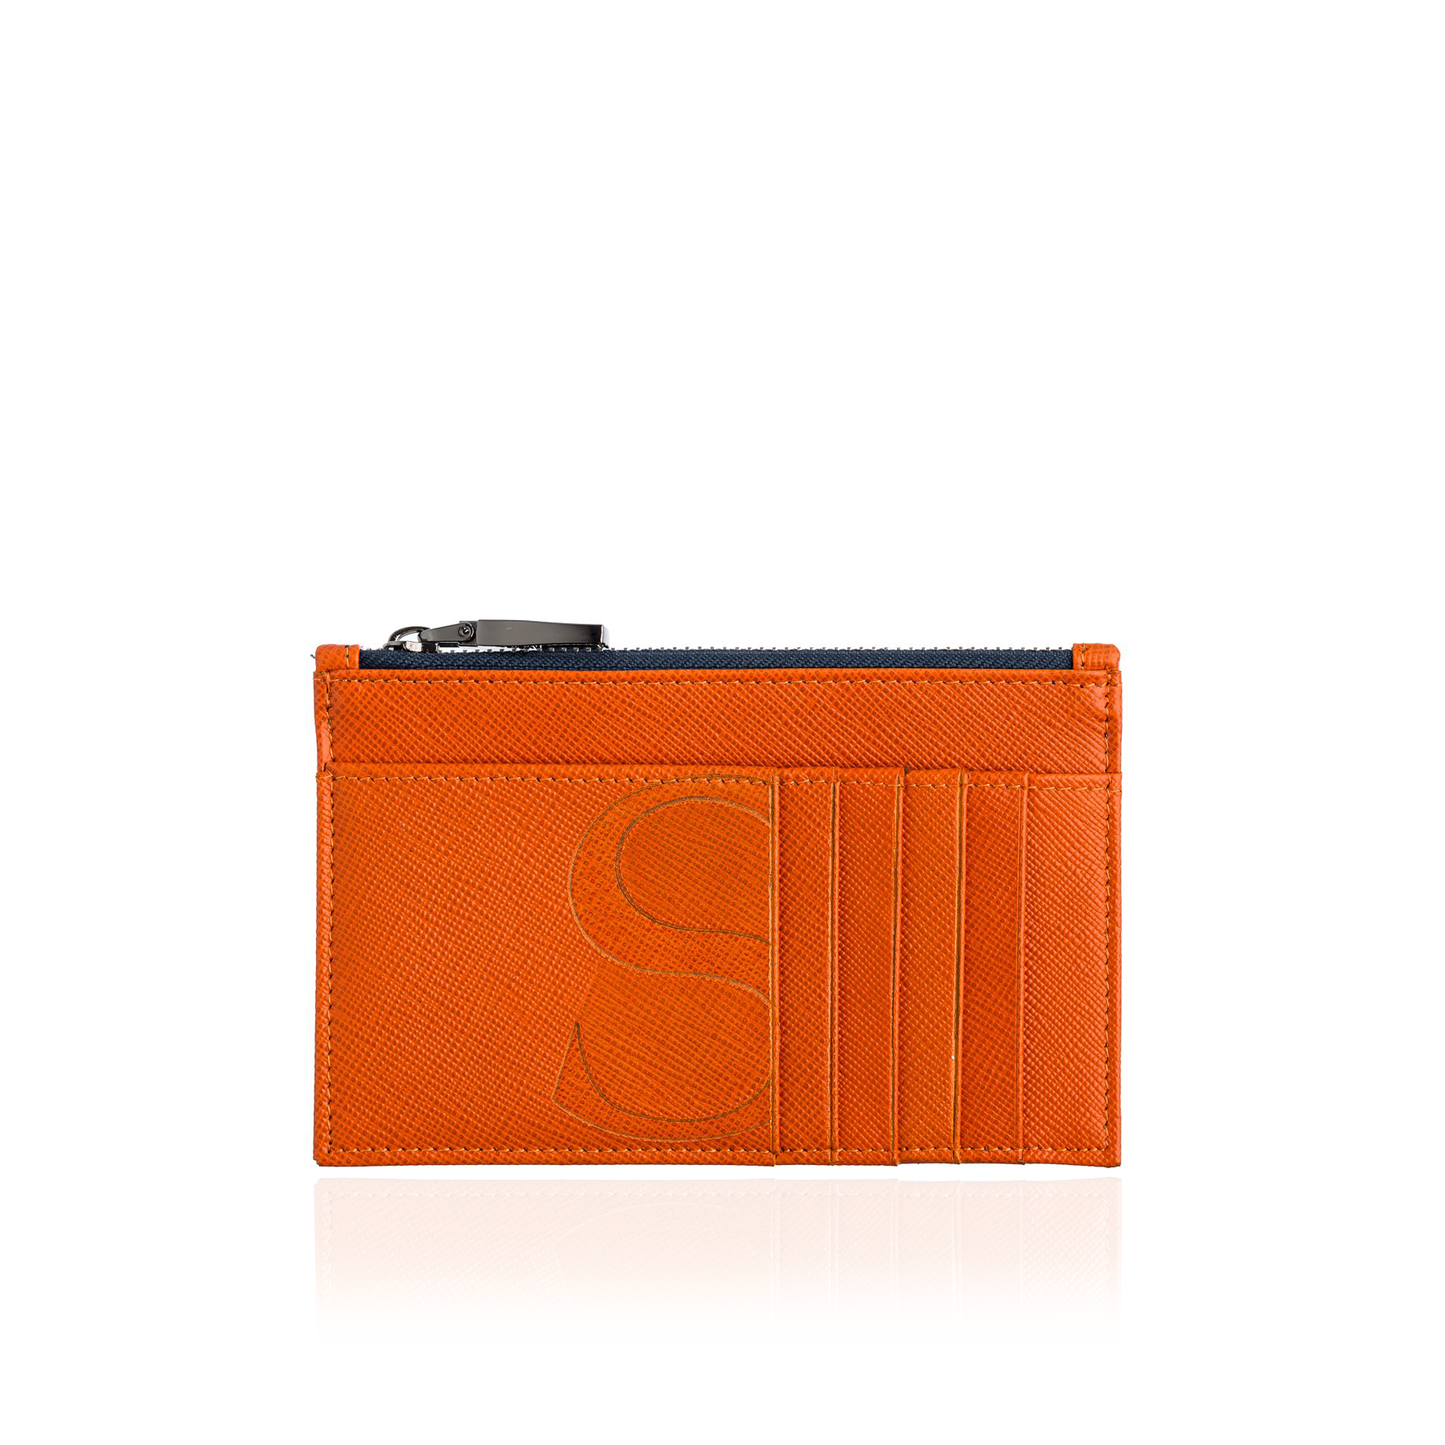 Load image into Gallery viewer, Credit Card Zip Pouch in Orange Textured Leather
